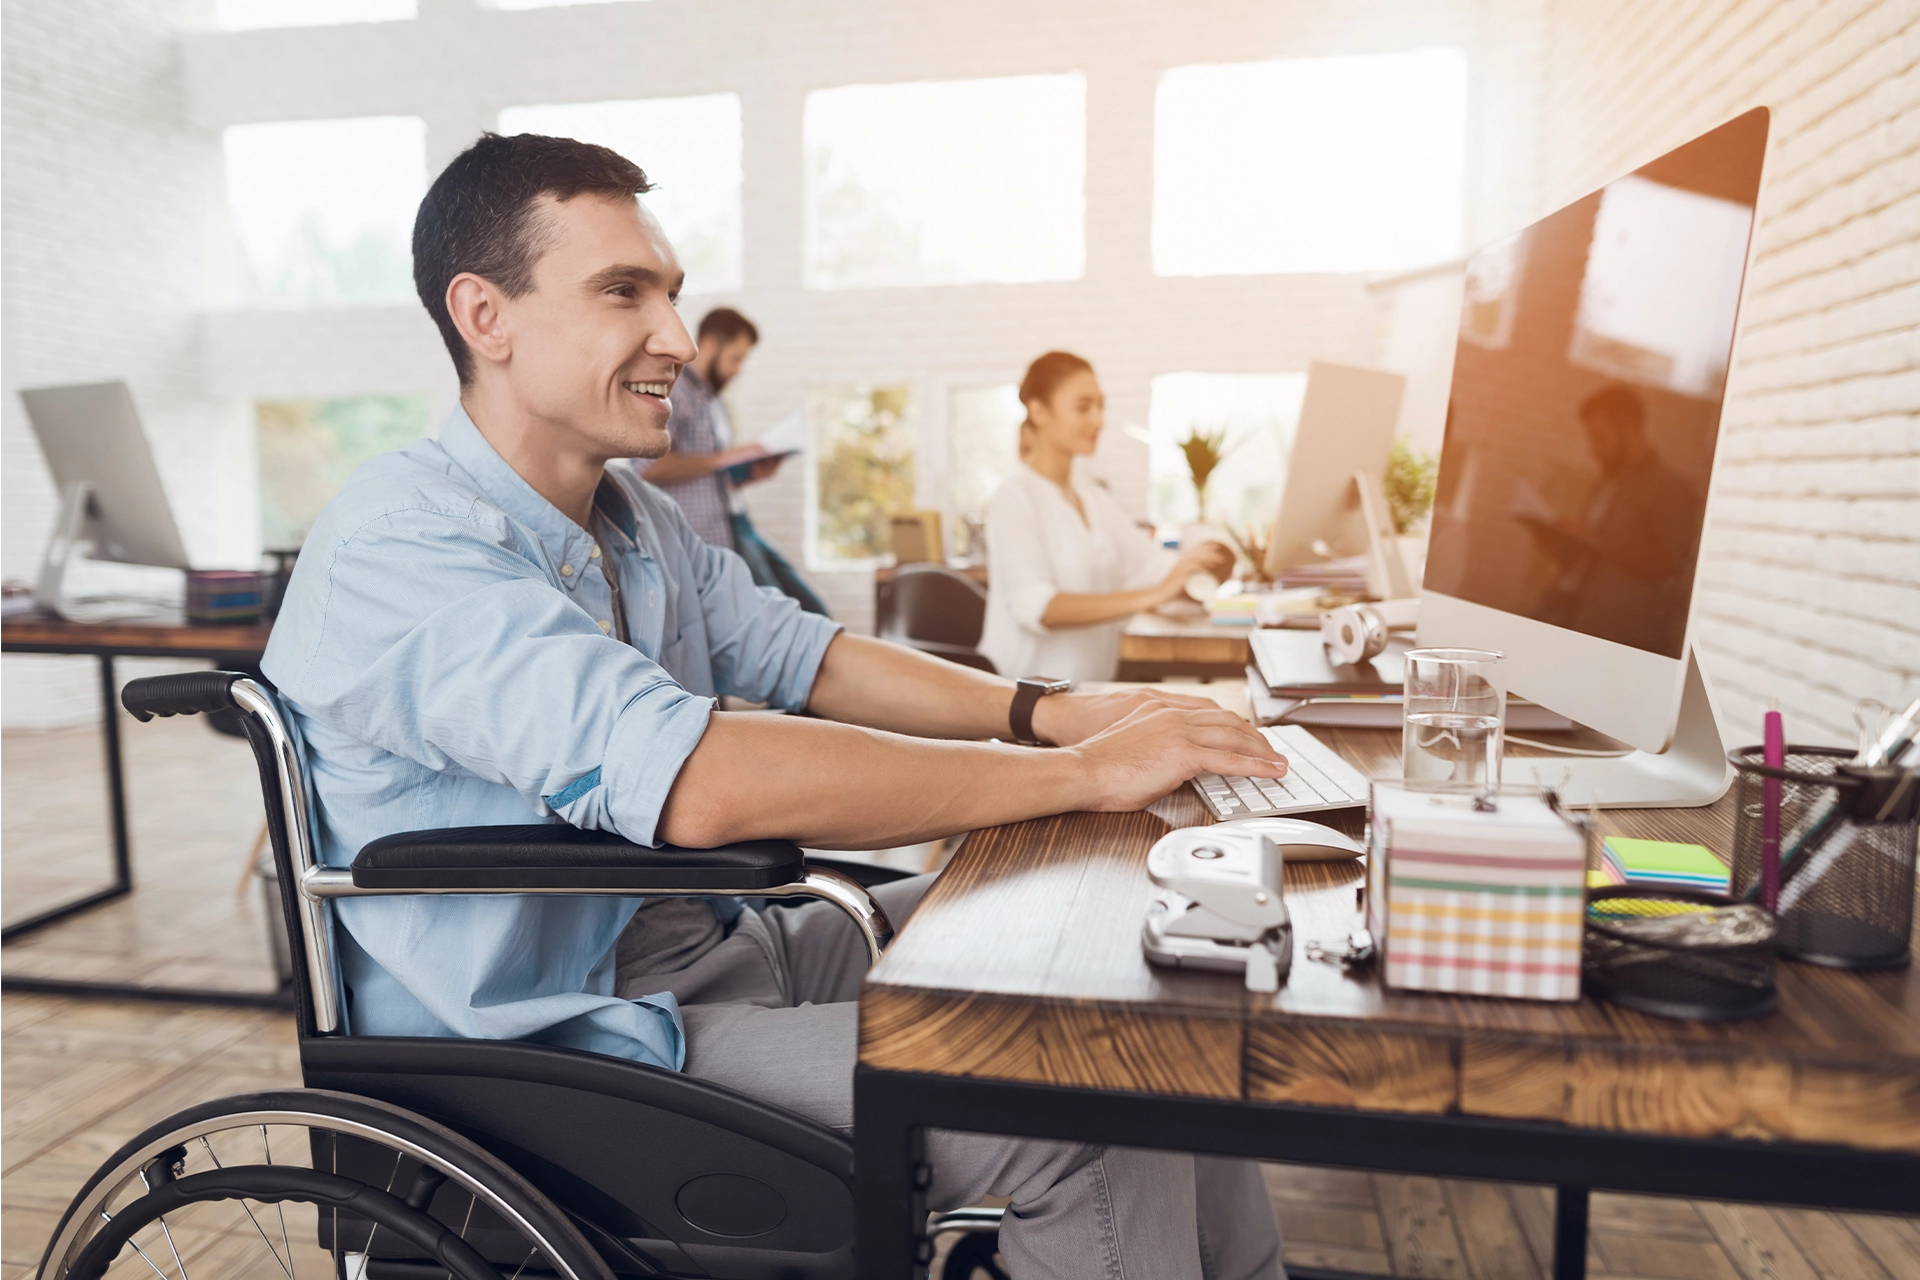 Smiling man in wheelchair sitting at an office desk